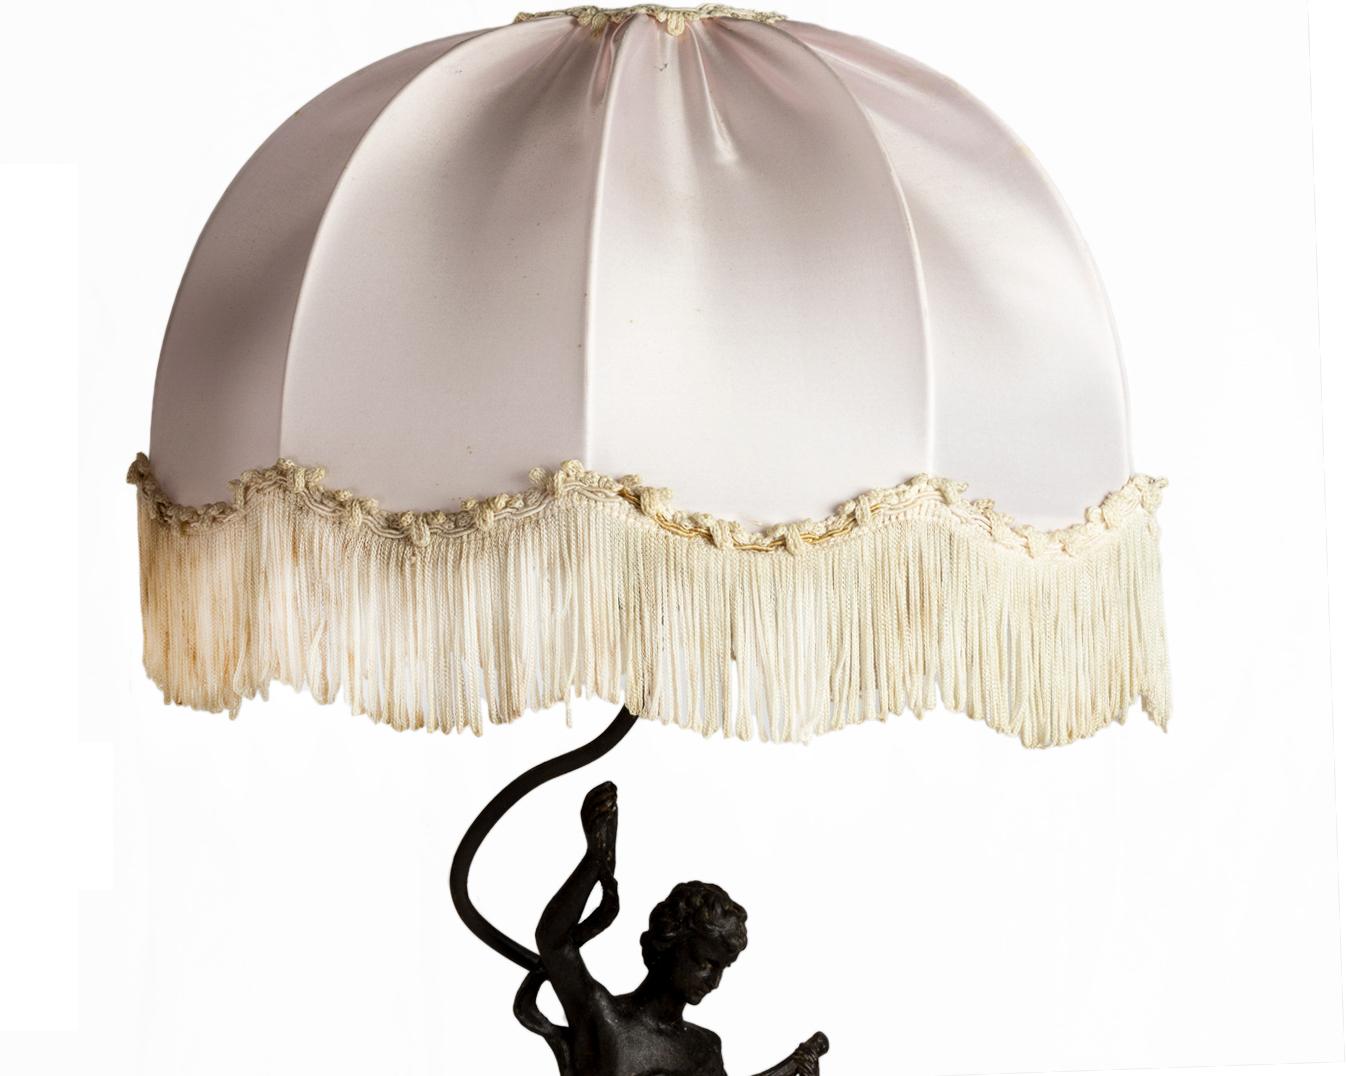 A 19th Century Neoclassical  table lamp with “Musique” description with a dome brocade silk lampshade.
A lady playing the lute and a young child (putti) playing the tambourine

Height 25,59 in (65 cm) 
Diameter 13,77 in (35 com) 
